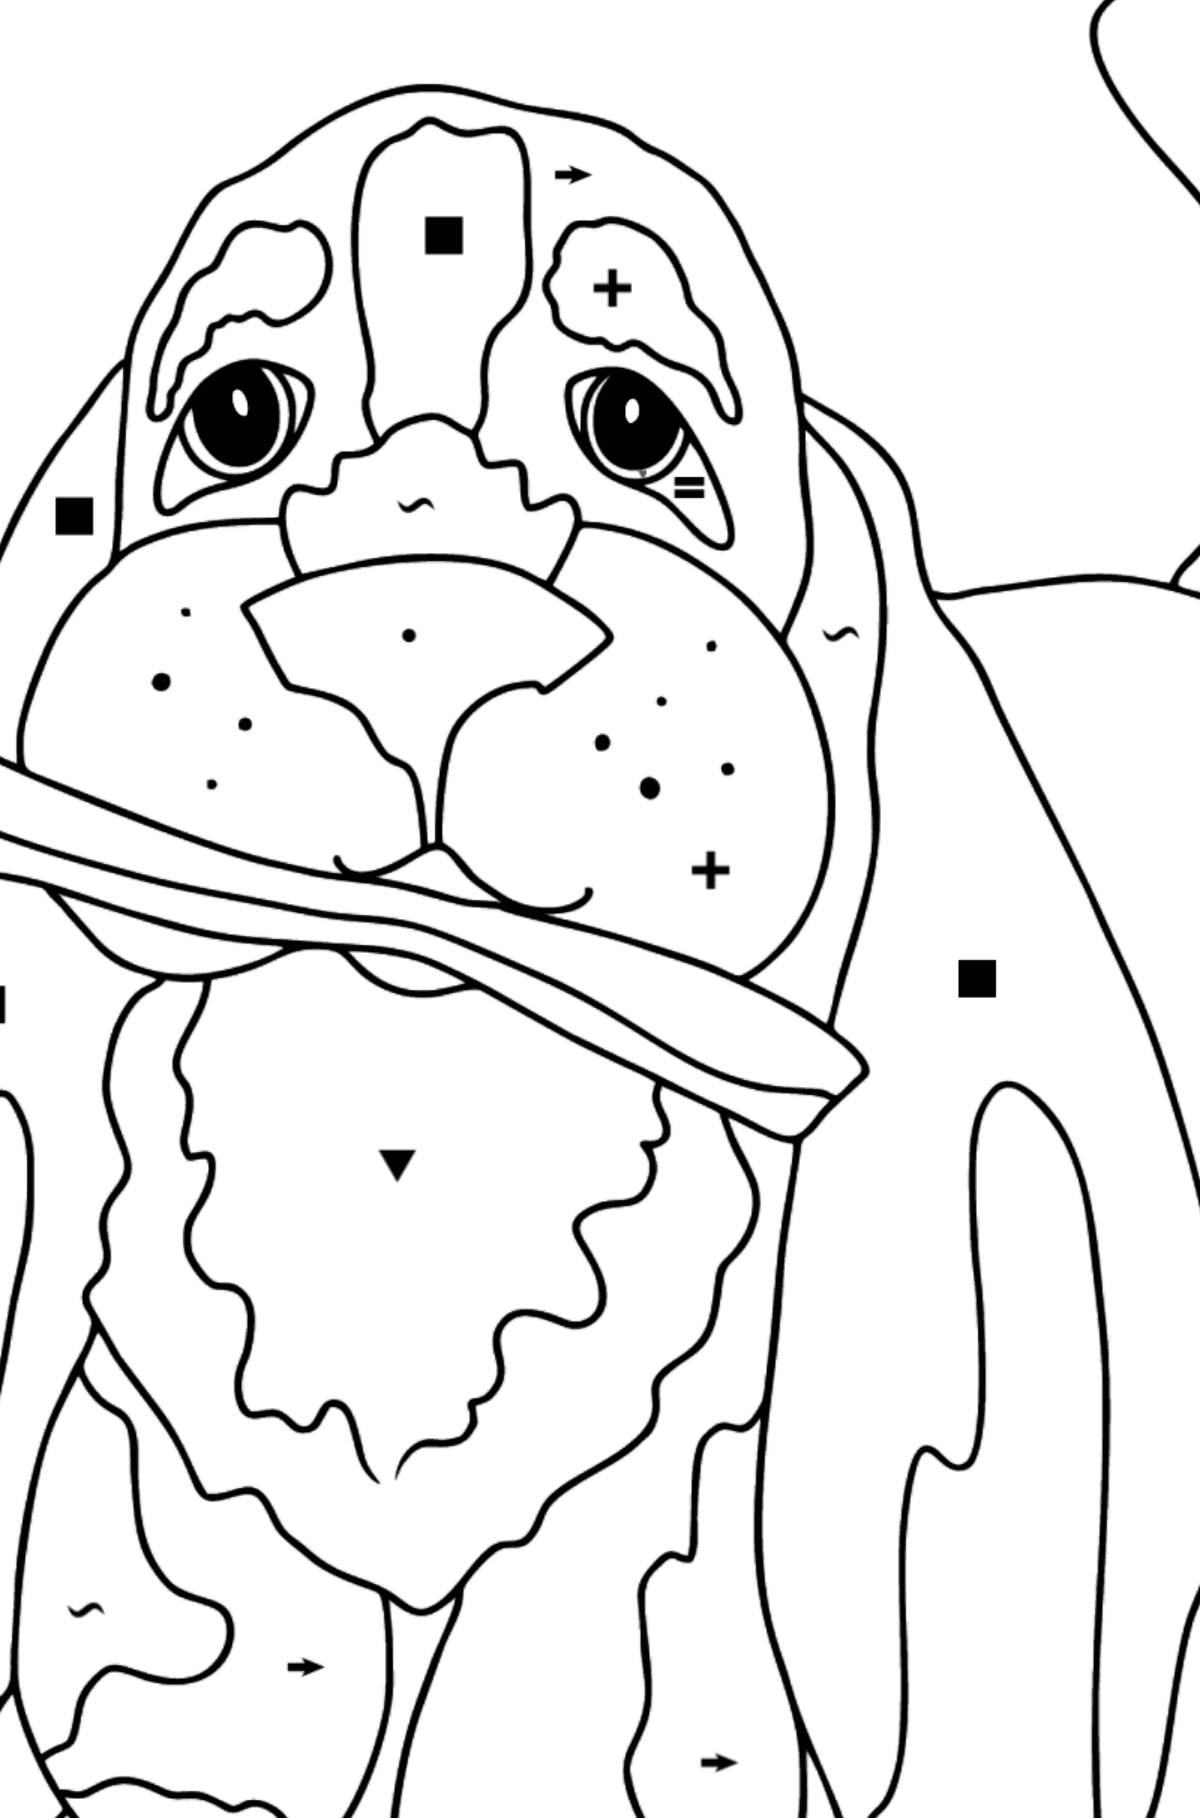 Coloring Page - A Dog is Waiting for Its Owner with a Stick - Coloring by Symbols for Kids